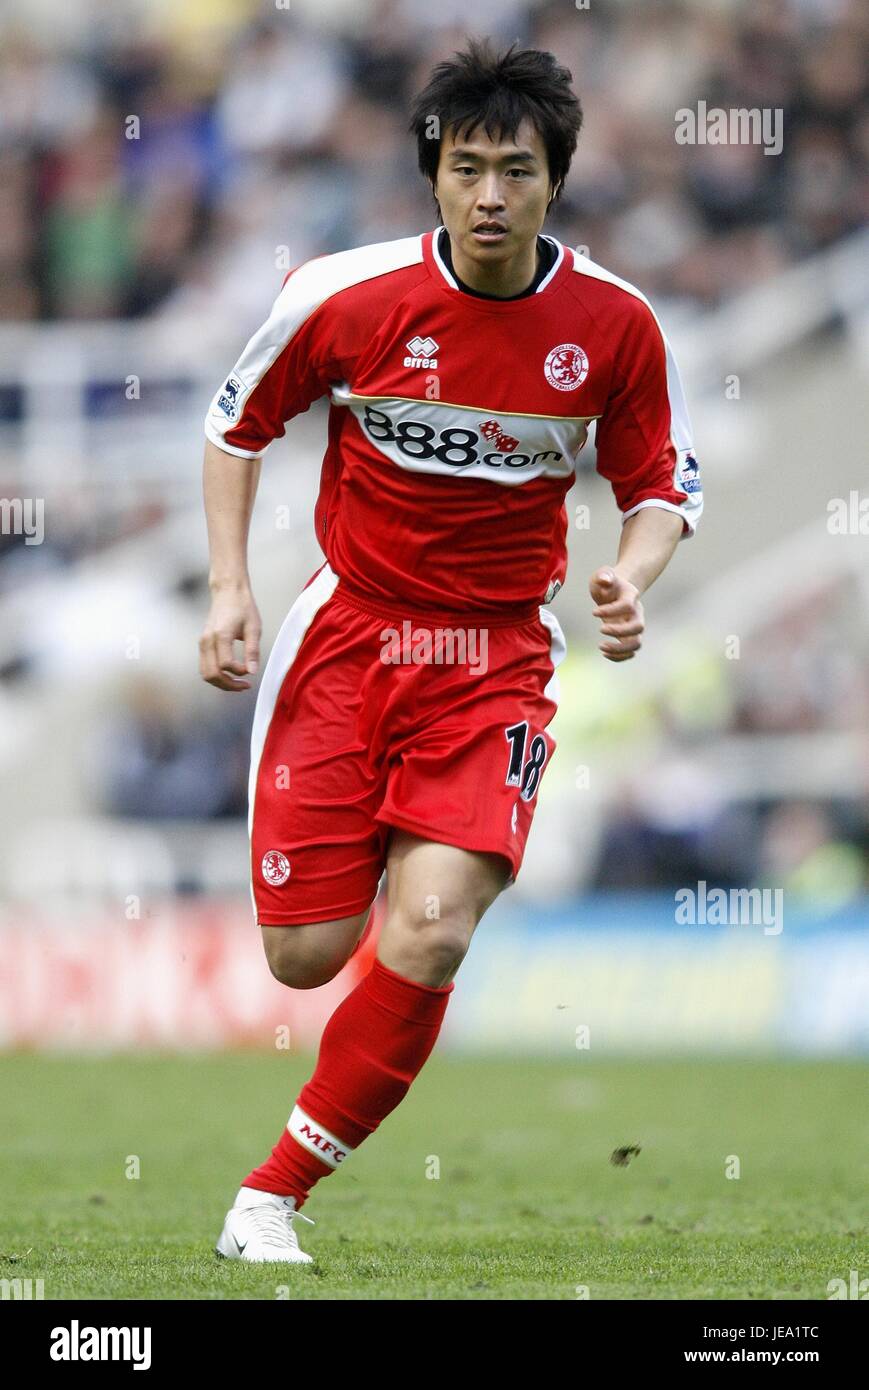 LEE DONG GOOK MIDDLESBROUGH FC ST JAMES PARK NEWCASTLE ENGLAND 03 March  2007 Stock Photo - Alamy